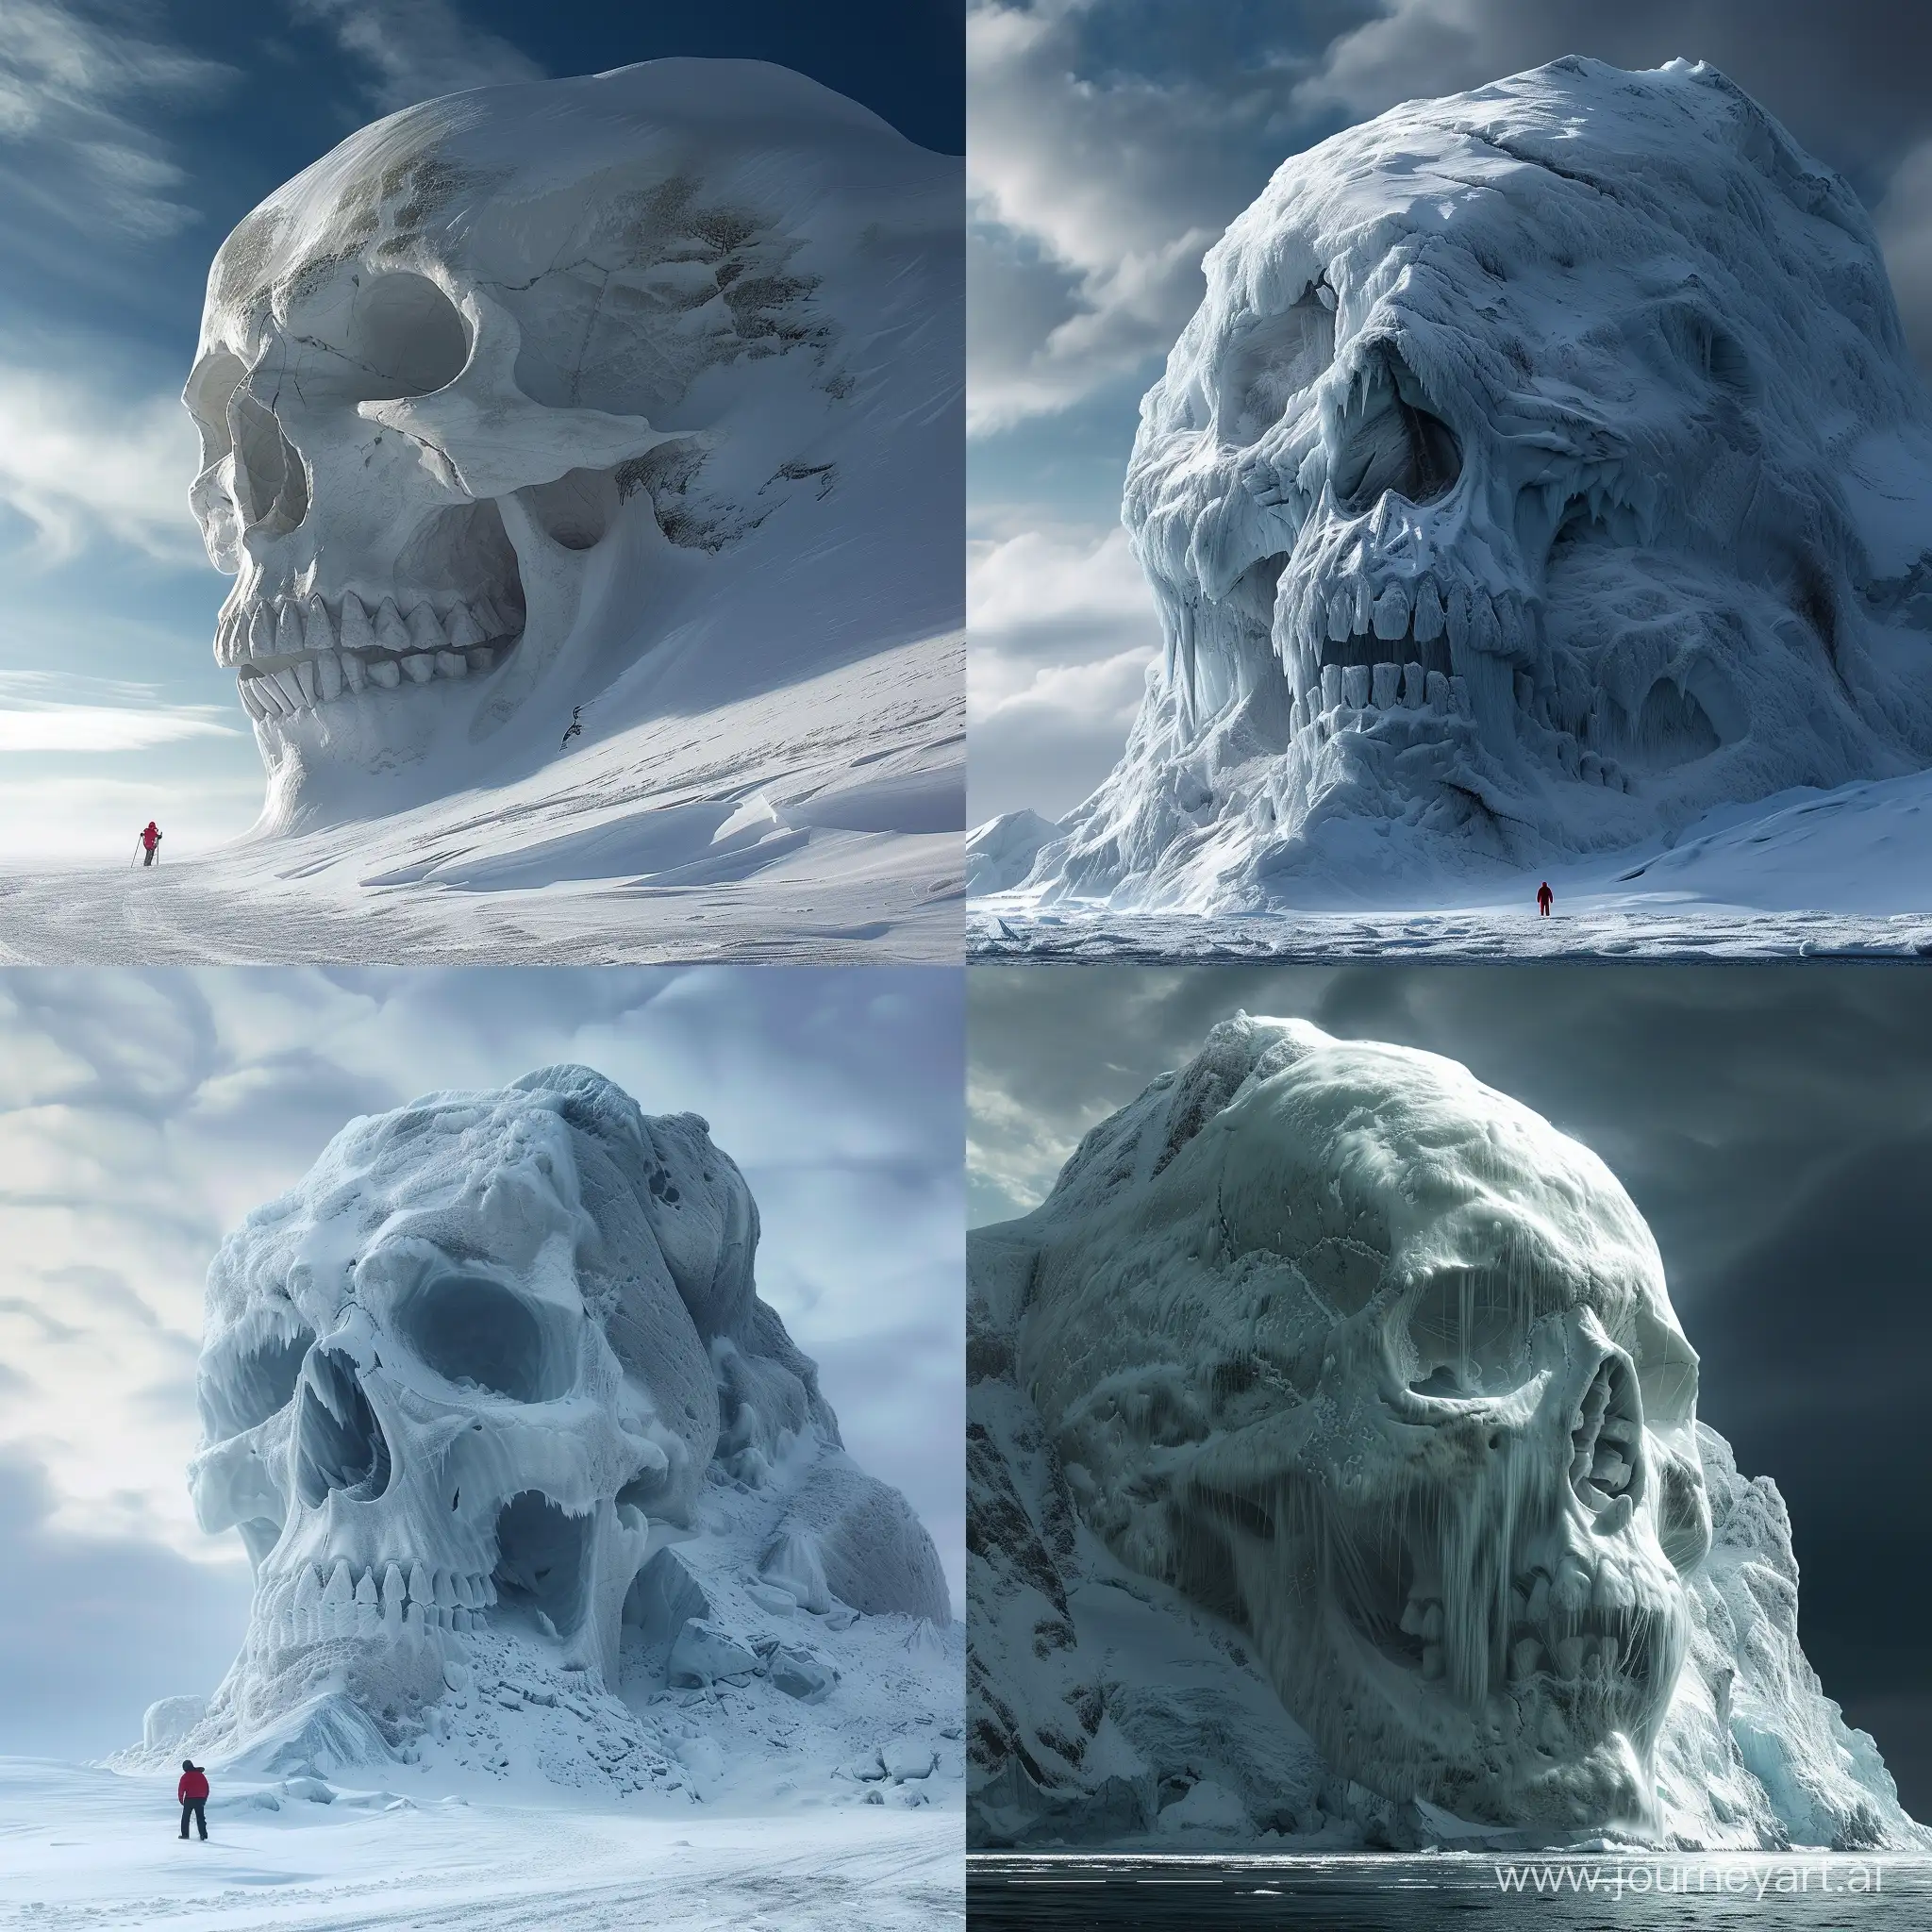 Ethereal-Arctic-Mountain-Resembling-a-Skull-A-Scary-and-Spooky-Landscape